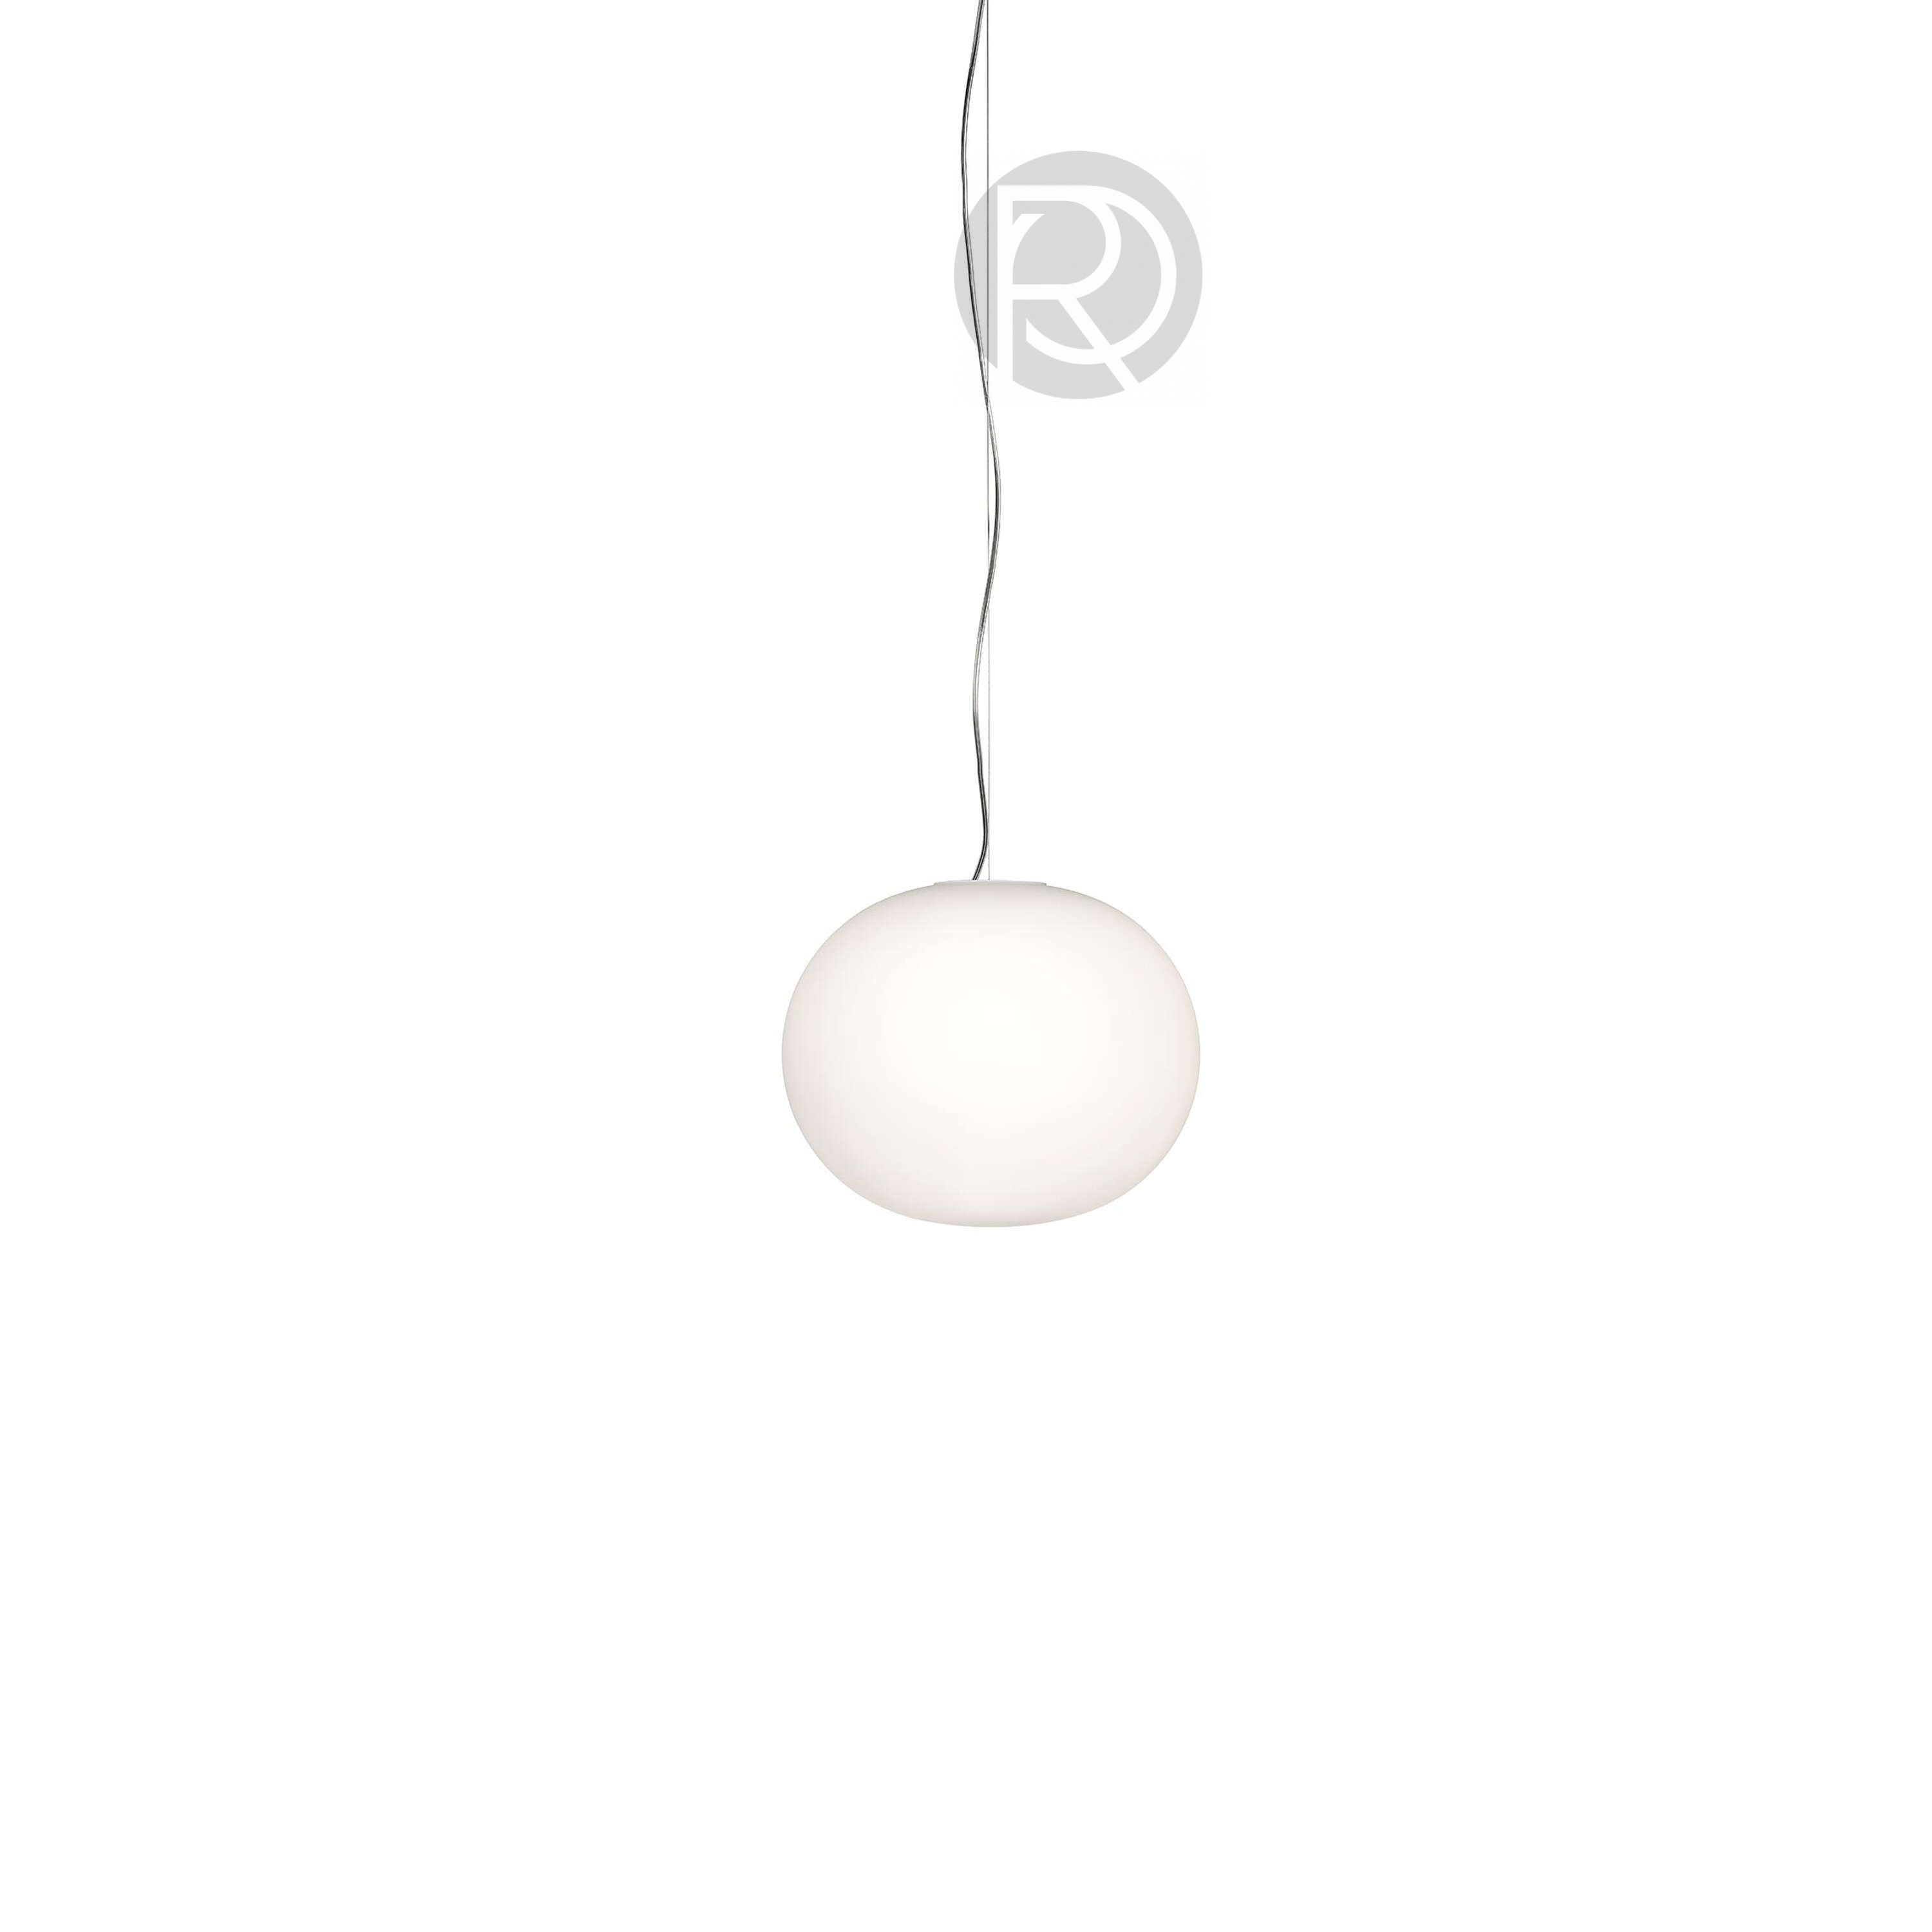 Pendant lamp GLO BALL by Flos